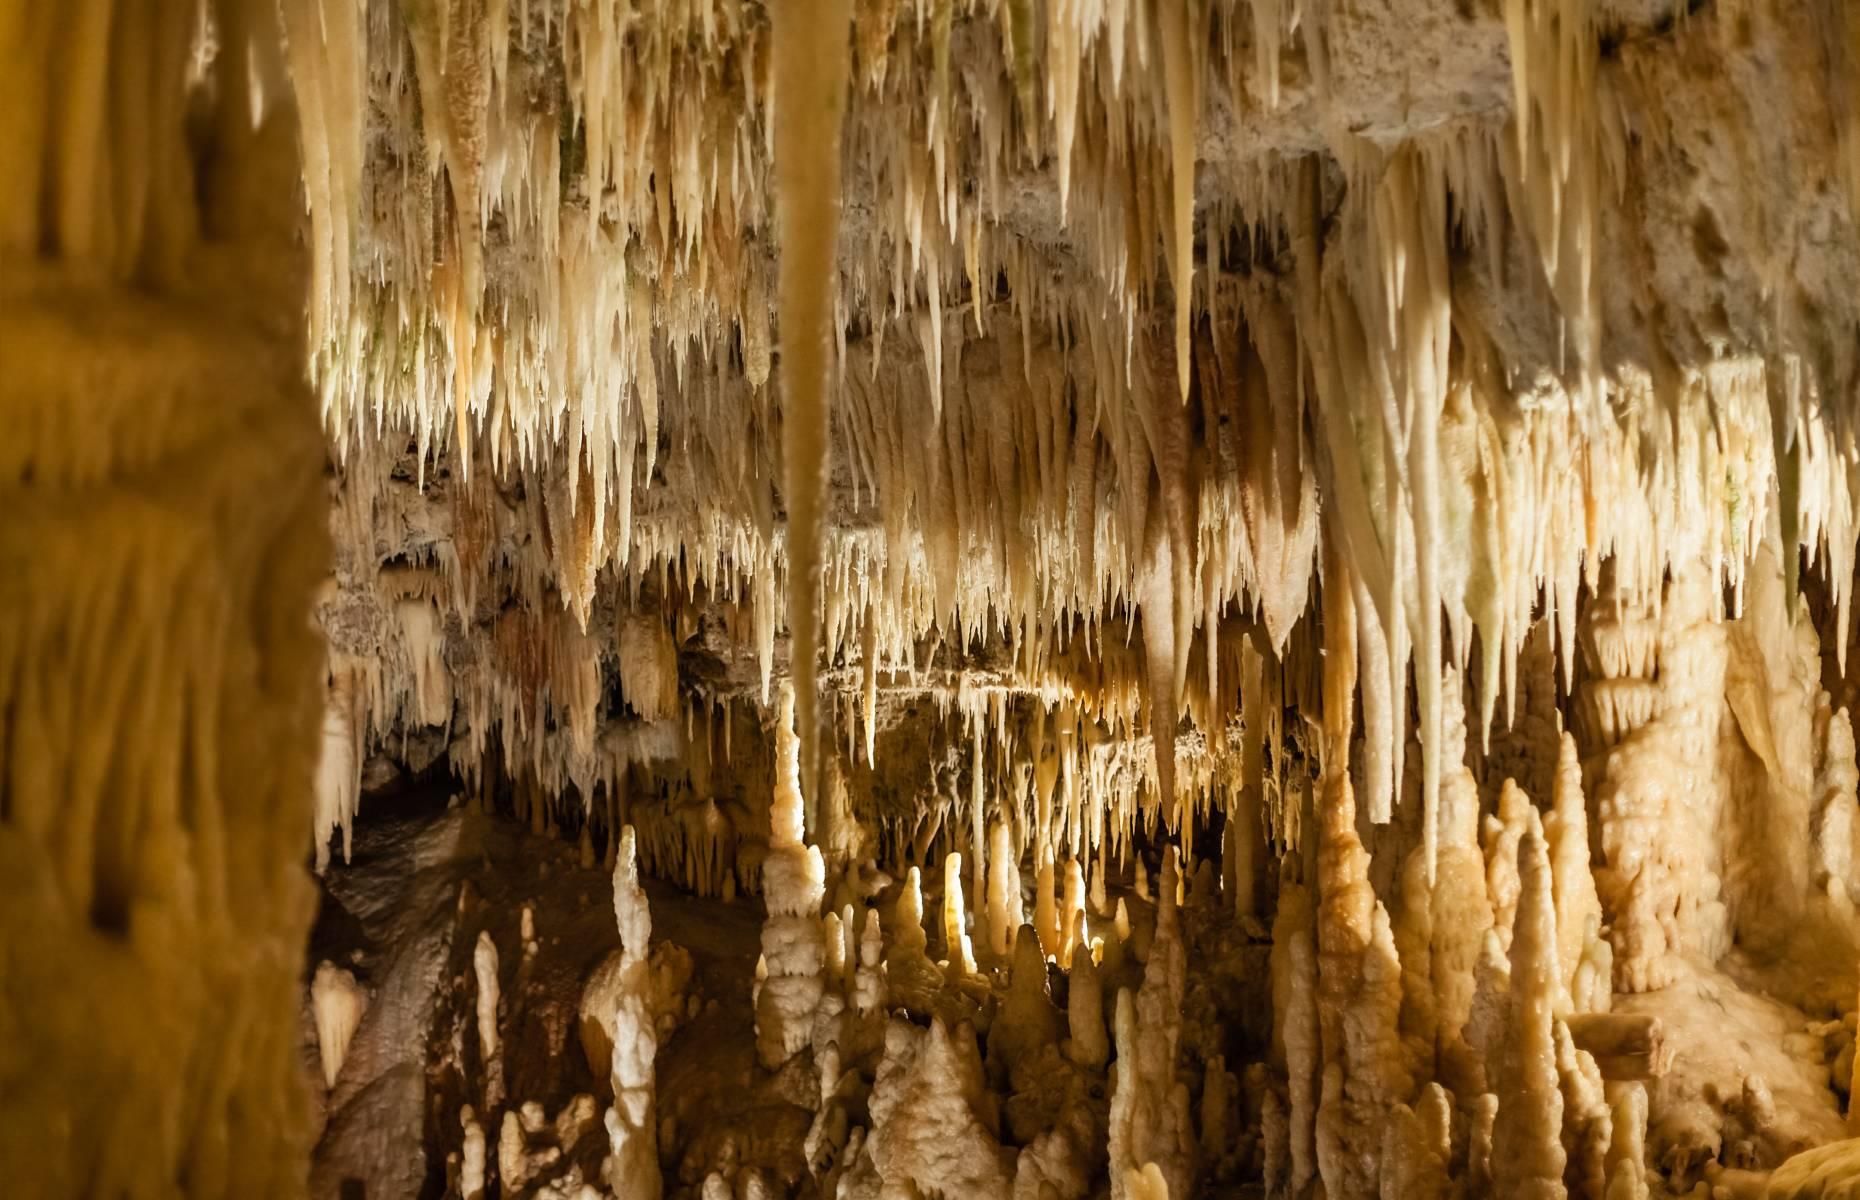 <p>Just outside the town of Castellana Grotte is a huge underground system of karst caves that reaches as deep as 400 feet (122m), though tours only reach as far as roughly 230 feet (70m). A cool 16ºC (61ºF) year-round, the series of large underground limestone caverns and their extraordinary stalactite and stalagmite formations were discovered in 1938.</p>